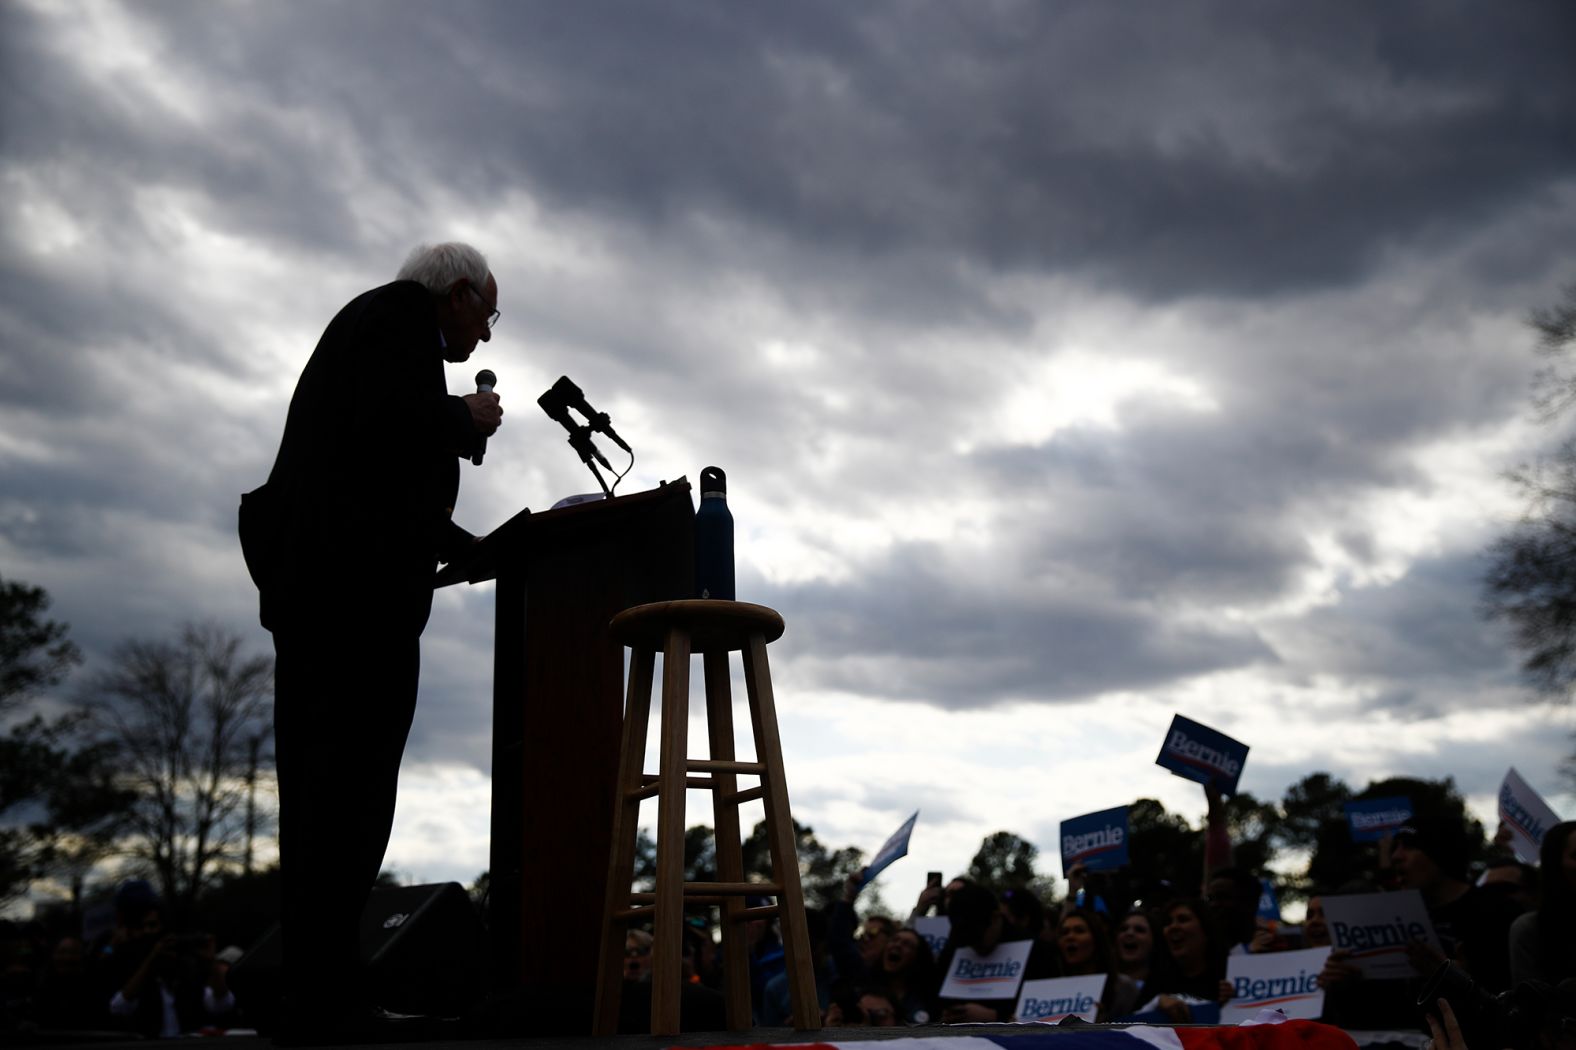 Sanders speaks during a campaign event on Friday.